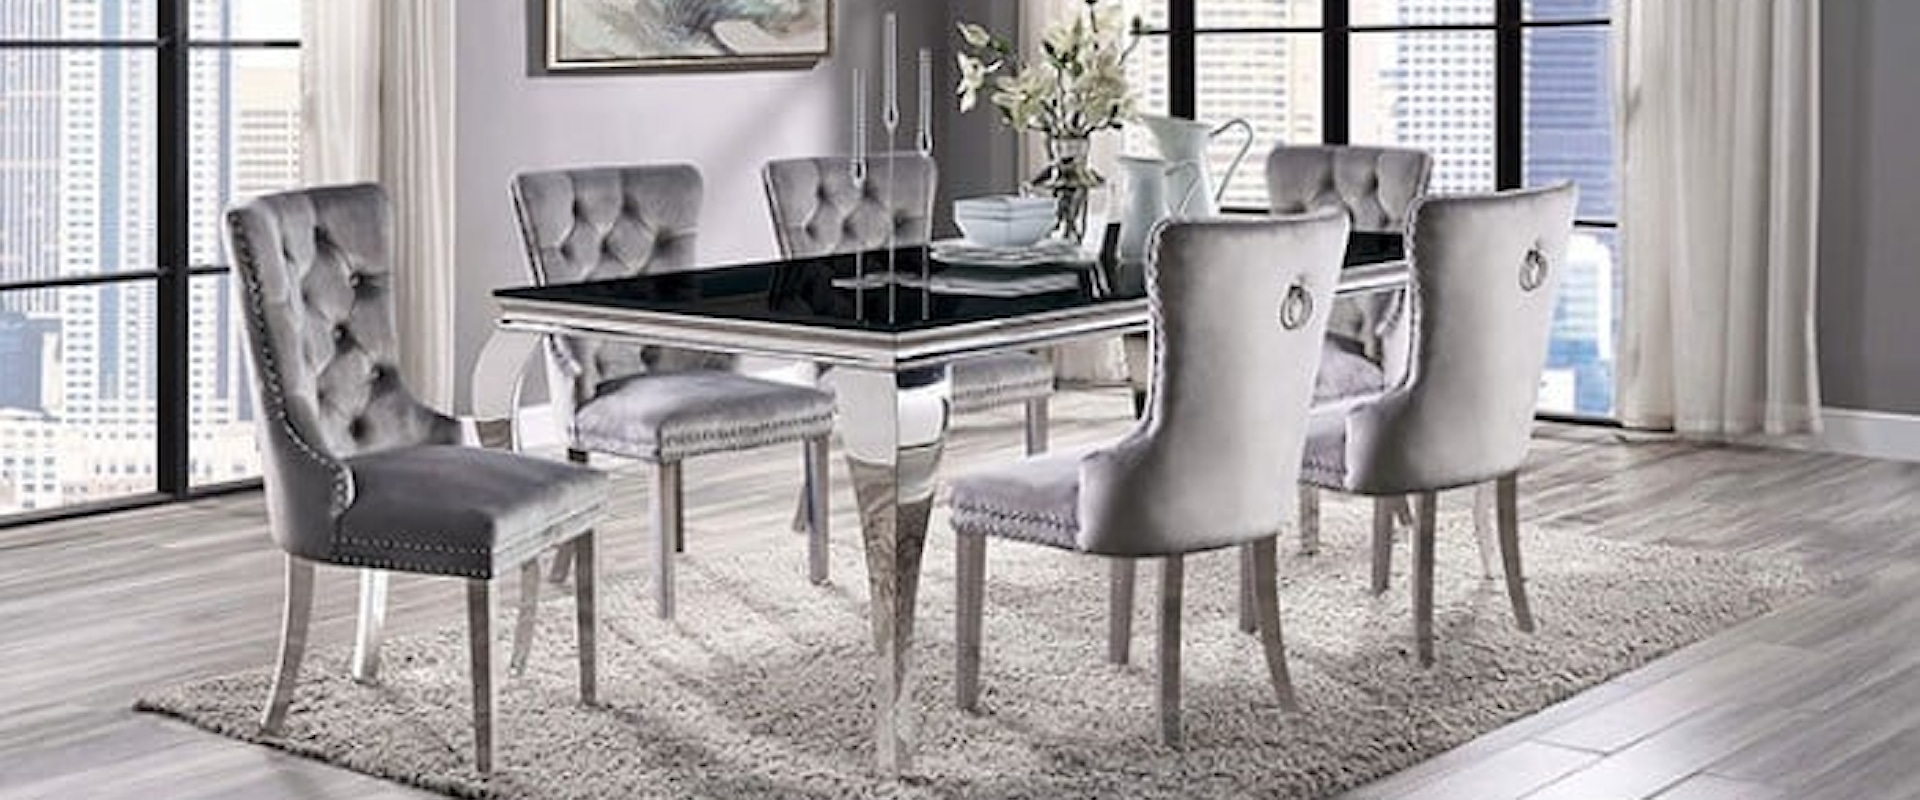 Glam 7-Piece Dining Set with Gray Upholstered Chairs